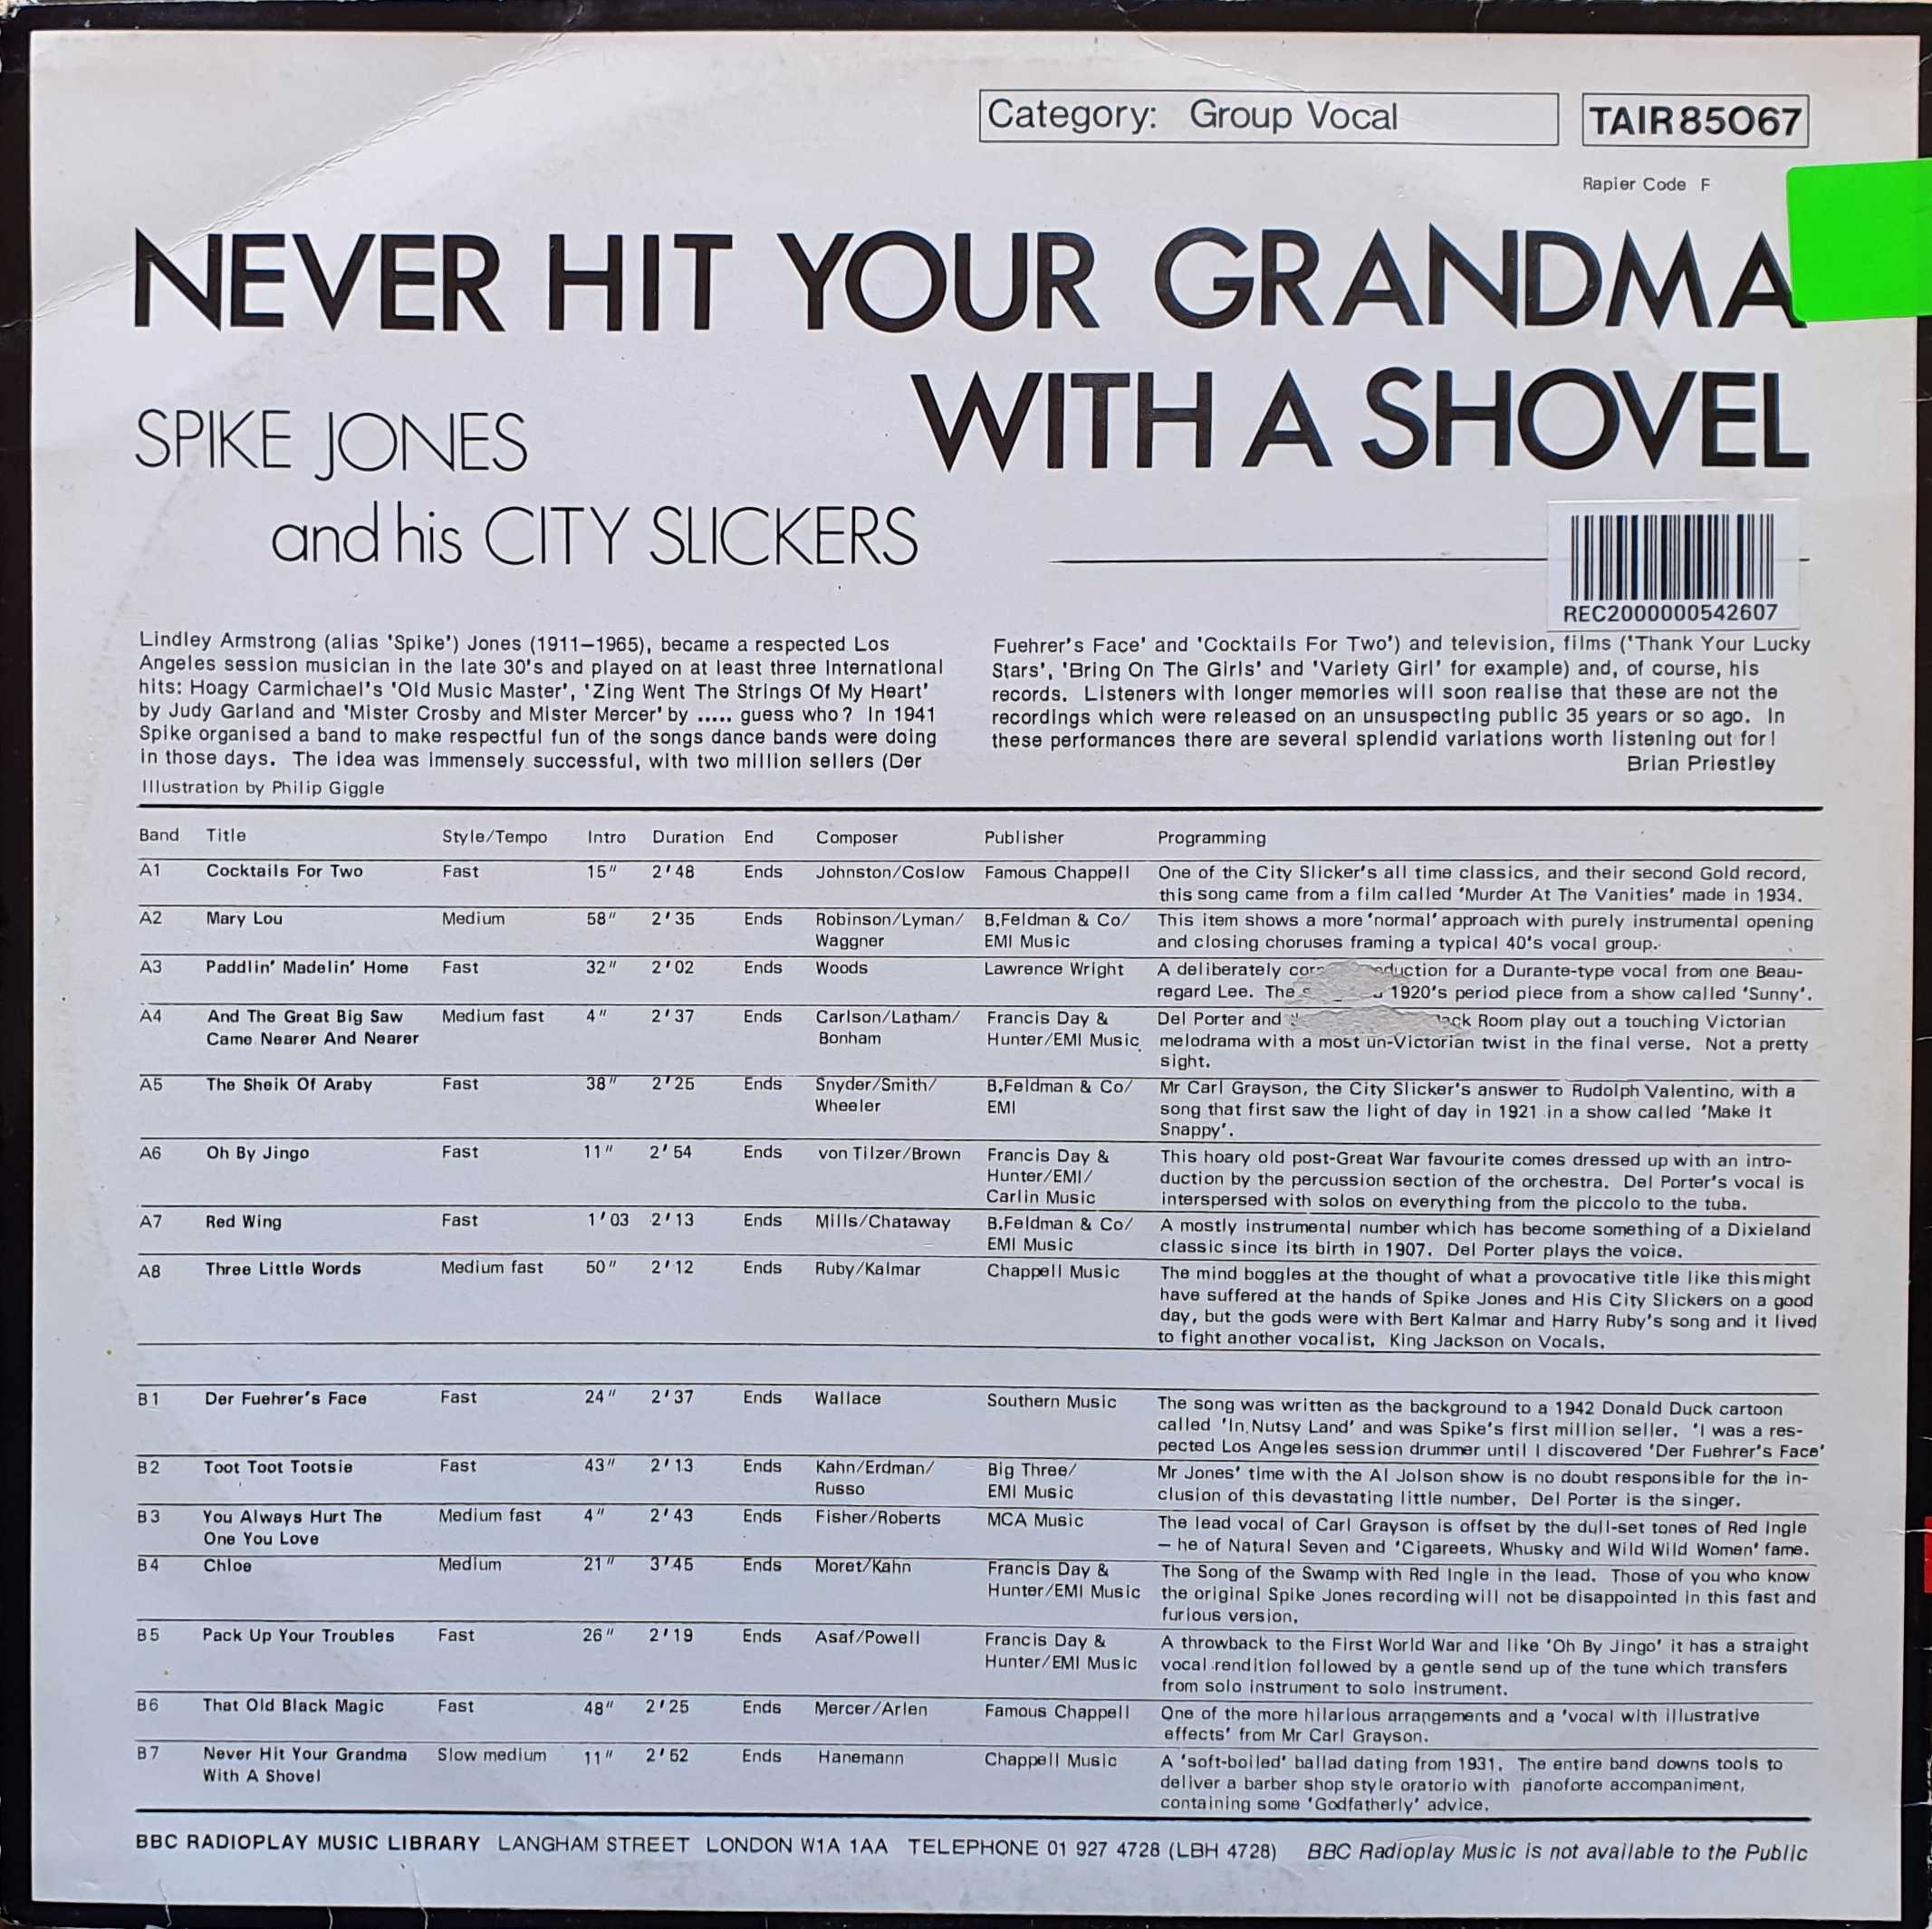 Picture of TAIR 85067 Never hit your grandma with a shovel by artist Spike Jones and his City Slickers from the BBC records and Tapes library